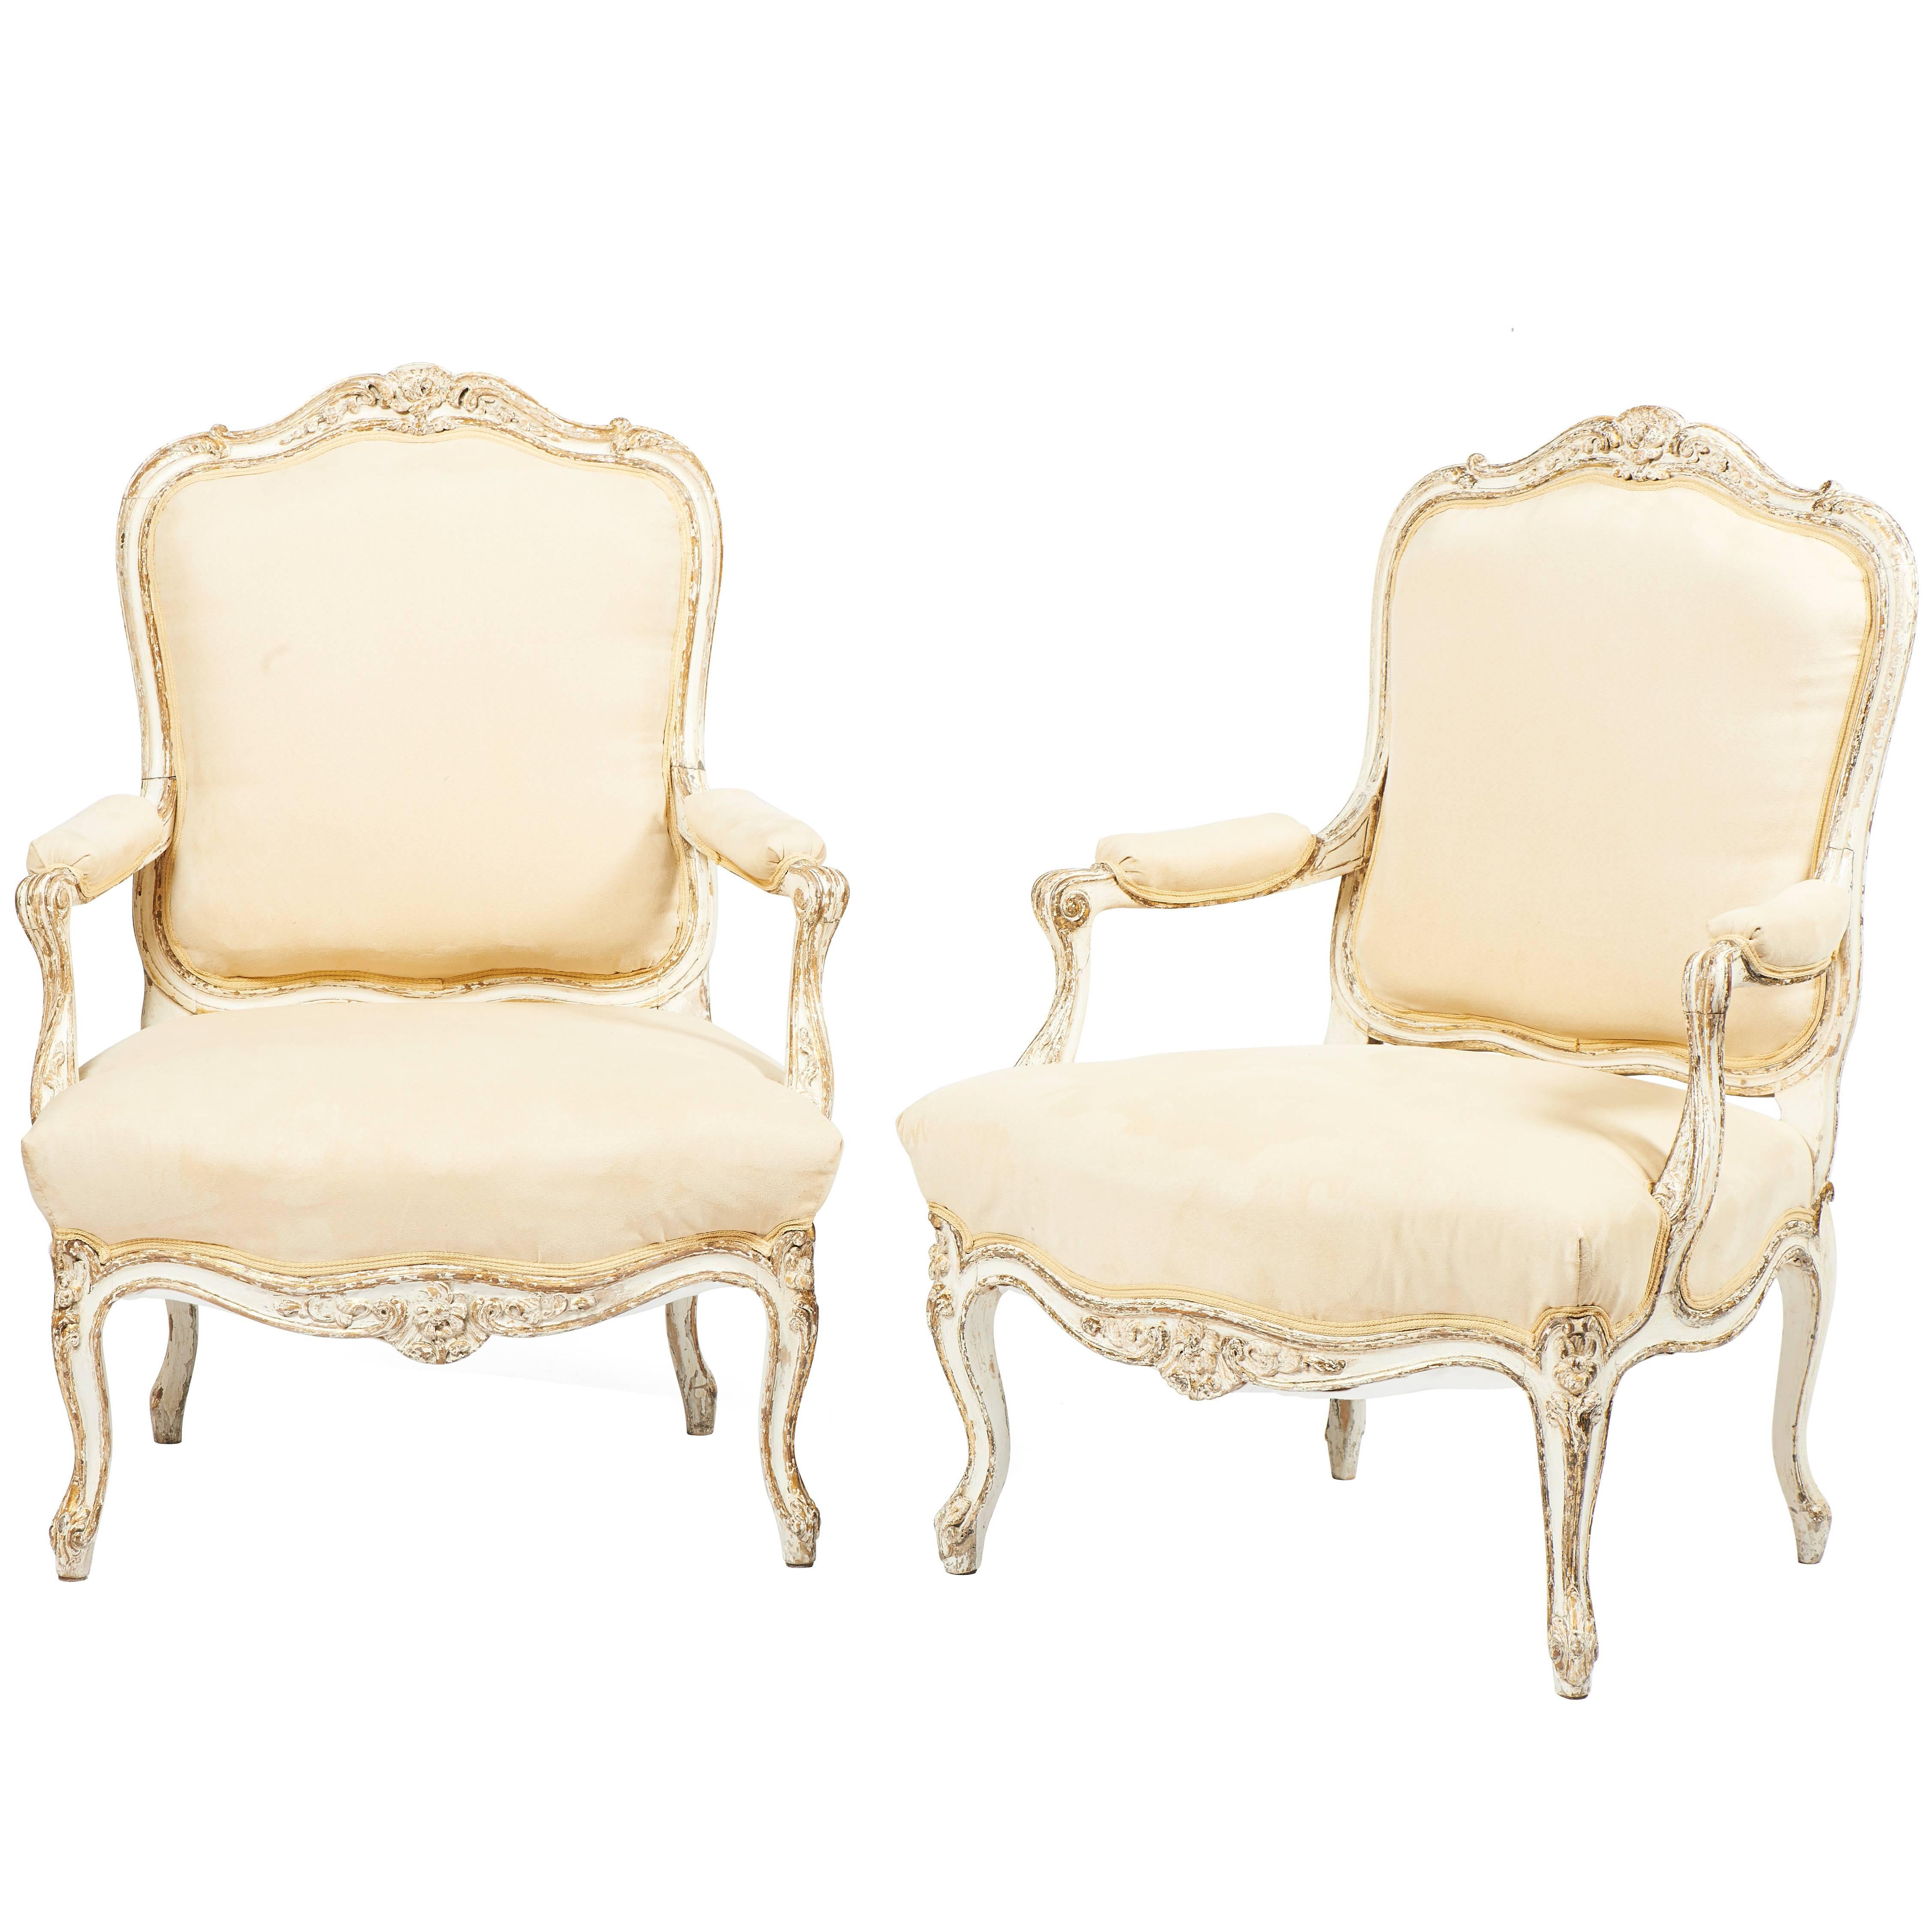 Pair of French Fauteuils in the Manner of Louis XV For Sale